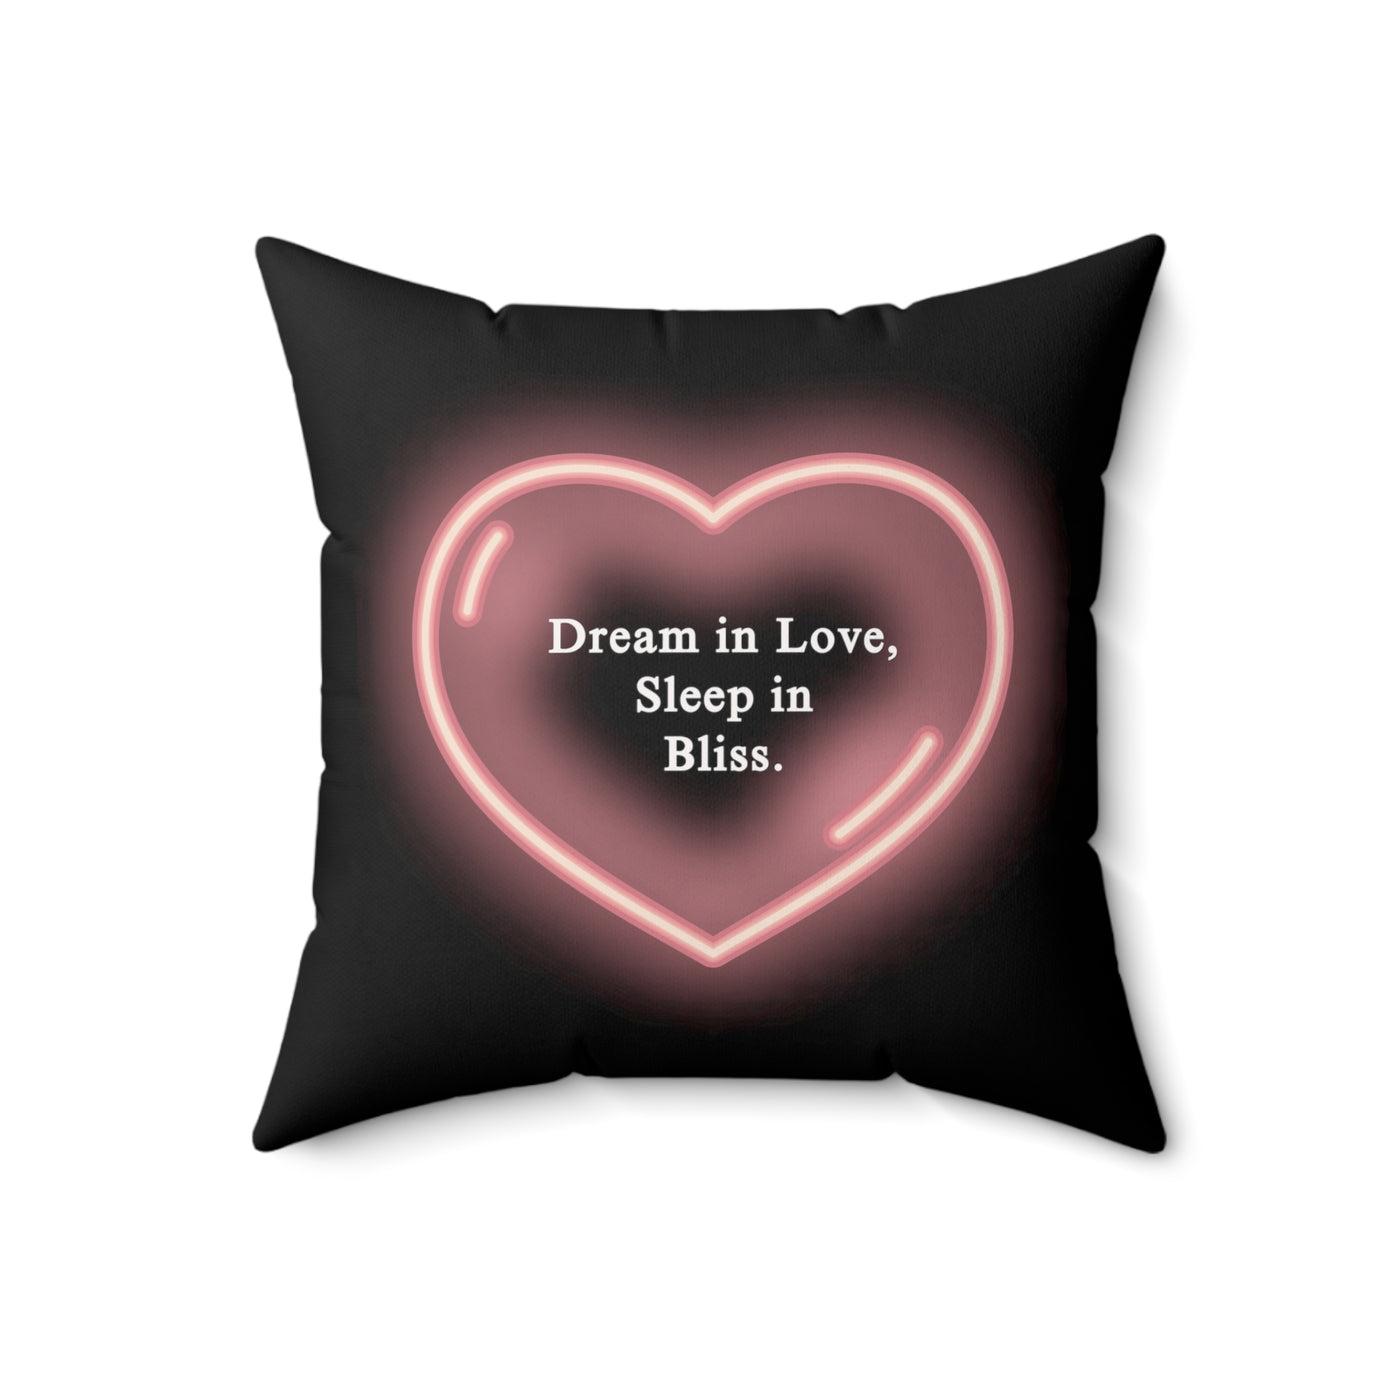 Love Mood Fantasy WHISPERS OF LOVE or DREAMS OF LOVE Spun Polyester Square Pillow